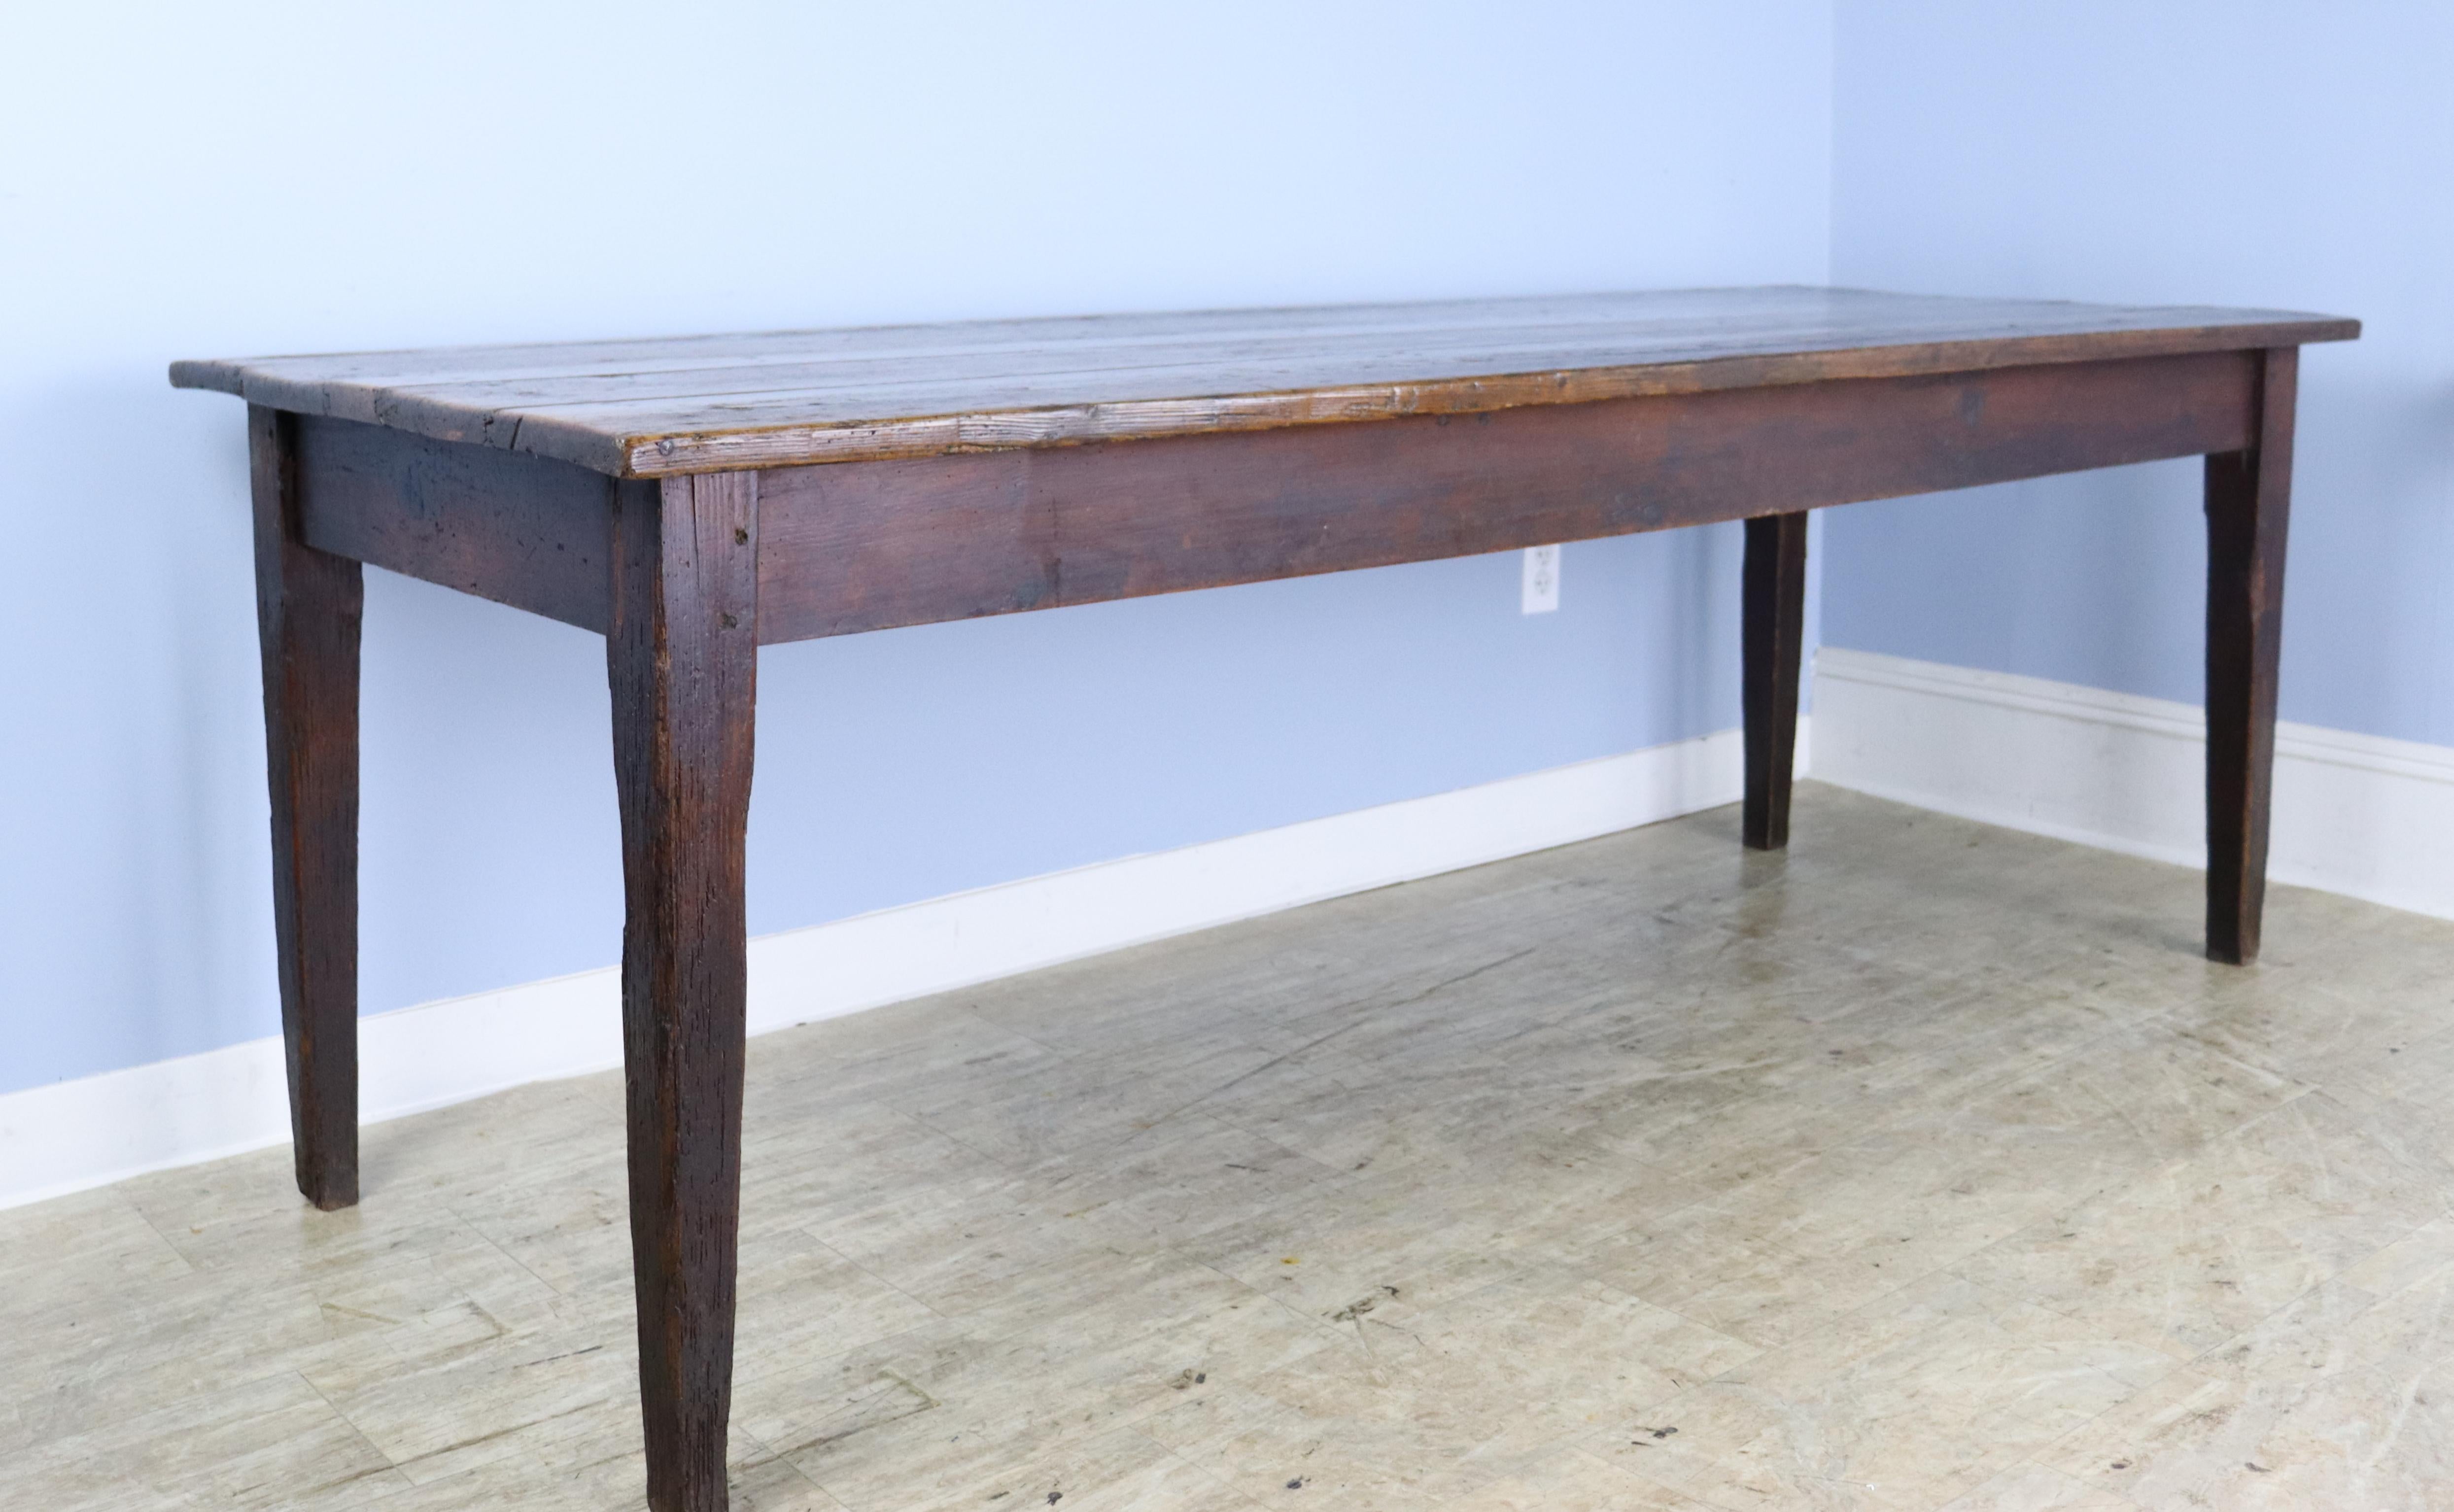 A classic pine farm table, generously proportioned with unusually good depth for a table of this age. Nice tapered legs and mellow color. The top and legs have dramatic original distress which adds a strong note of interest, shown in several of the